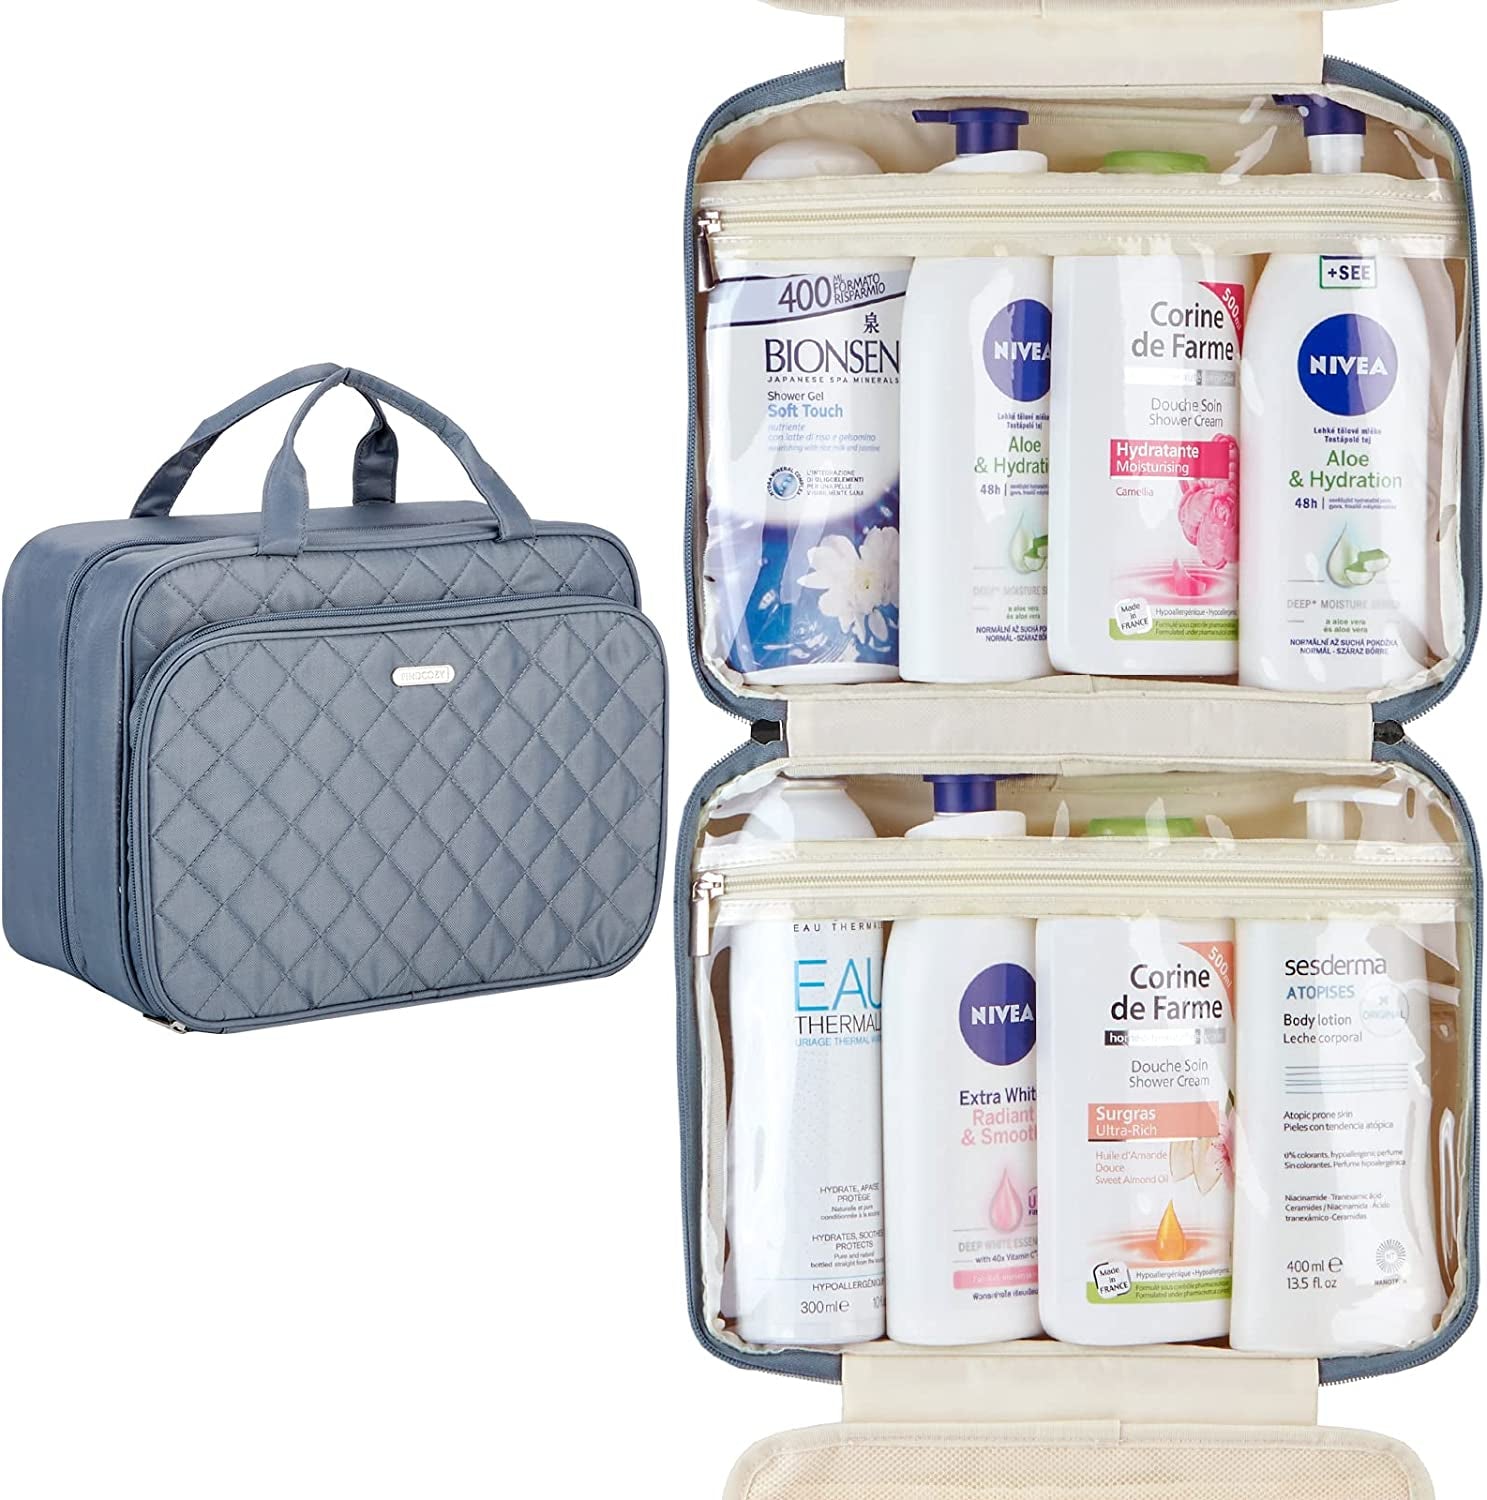 "Premium Travel Toiletry Organizer: Spacious Hanging Toiletry Bag for Women with Dedicated Beauty Essentials Compartment - Ideal for Accommodating Full-Sized Bottles and Cosmetics (Grey)"